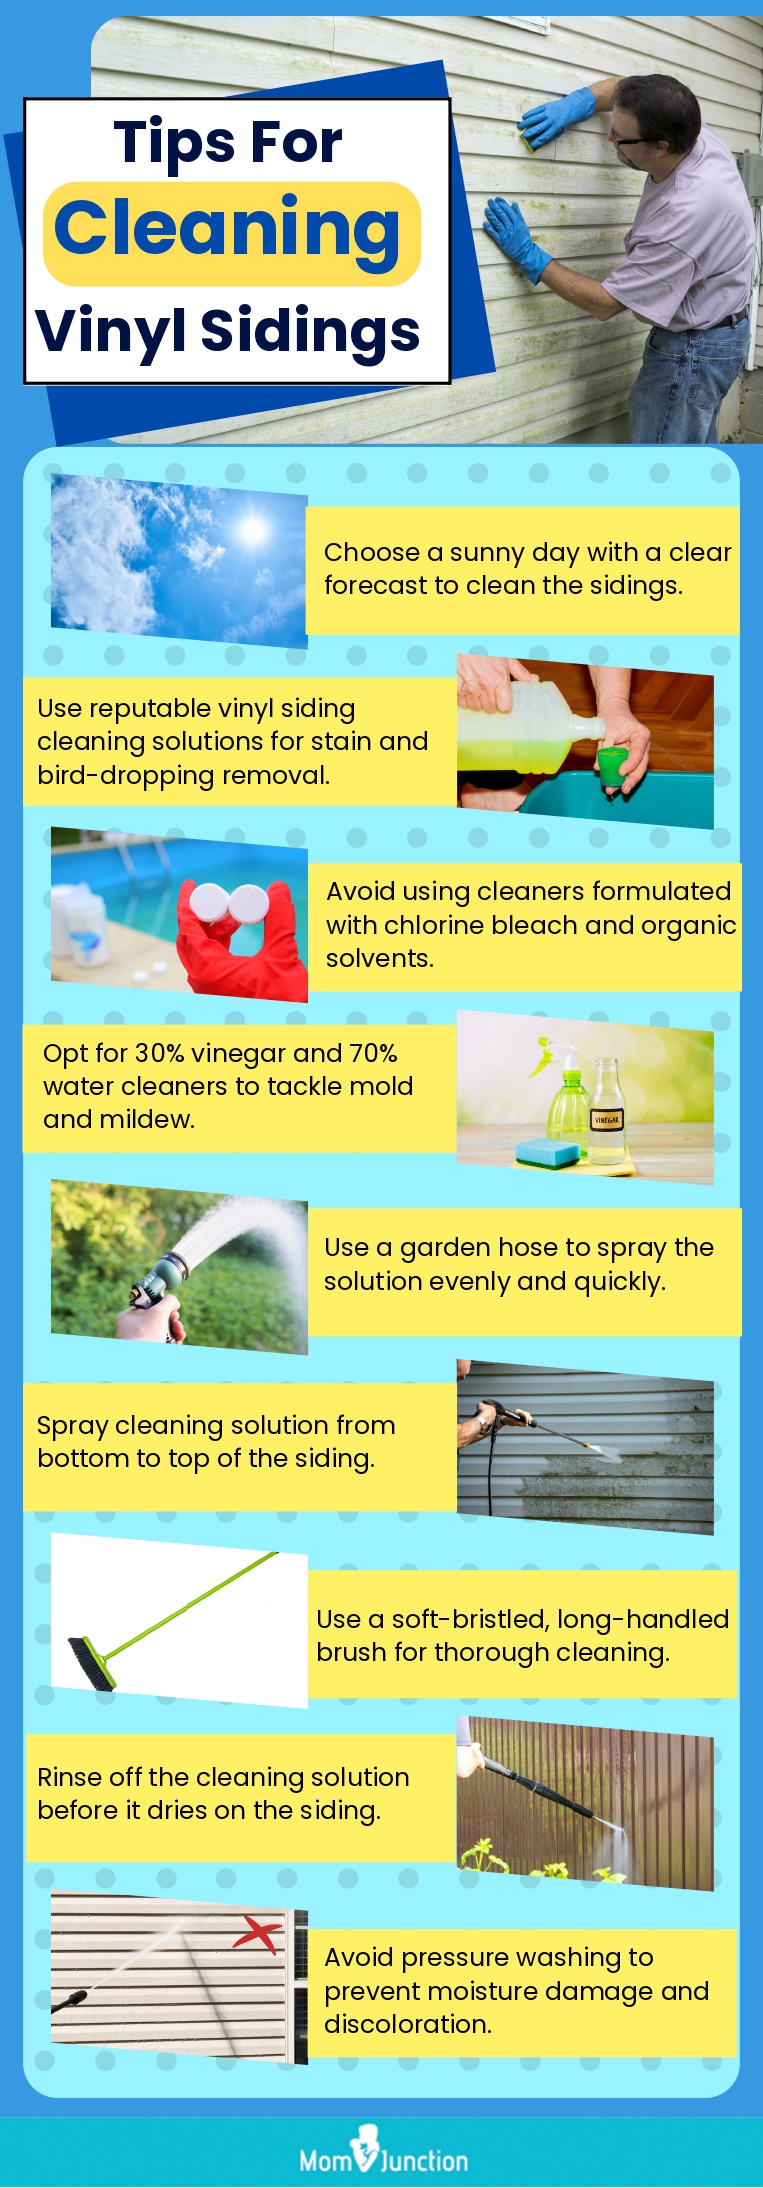 Tips For Cleaning Vinyl Sidings (infographic)